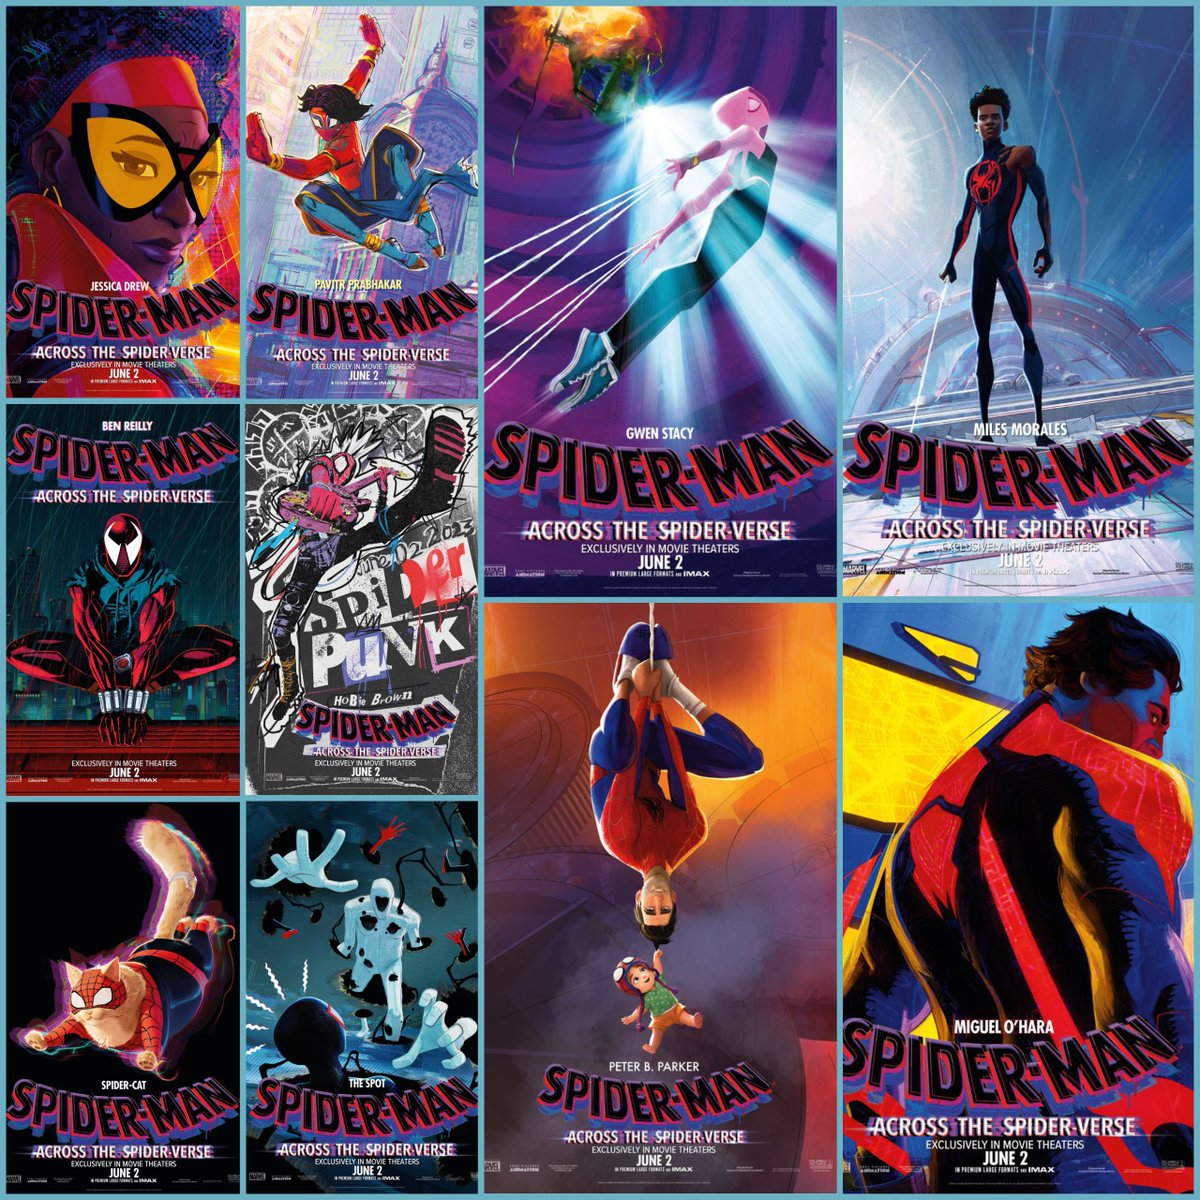 New Spider-Man: Across the #SpiderVerse character posters for:

#MilesMorales
#GwenStacy 
#PeterBParker
#MiguelOHara
#JessicaDrew
#SpiderManIndia
#SpiderPunk 
#ScarletSpider
#SpiderCat 
#TheSpot